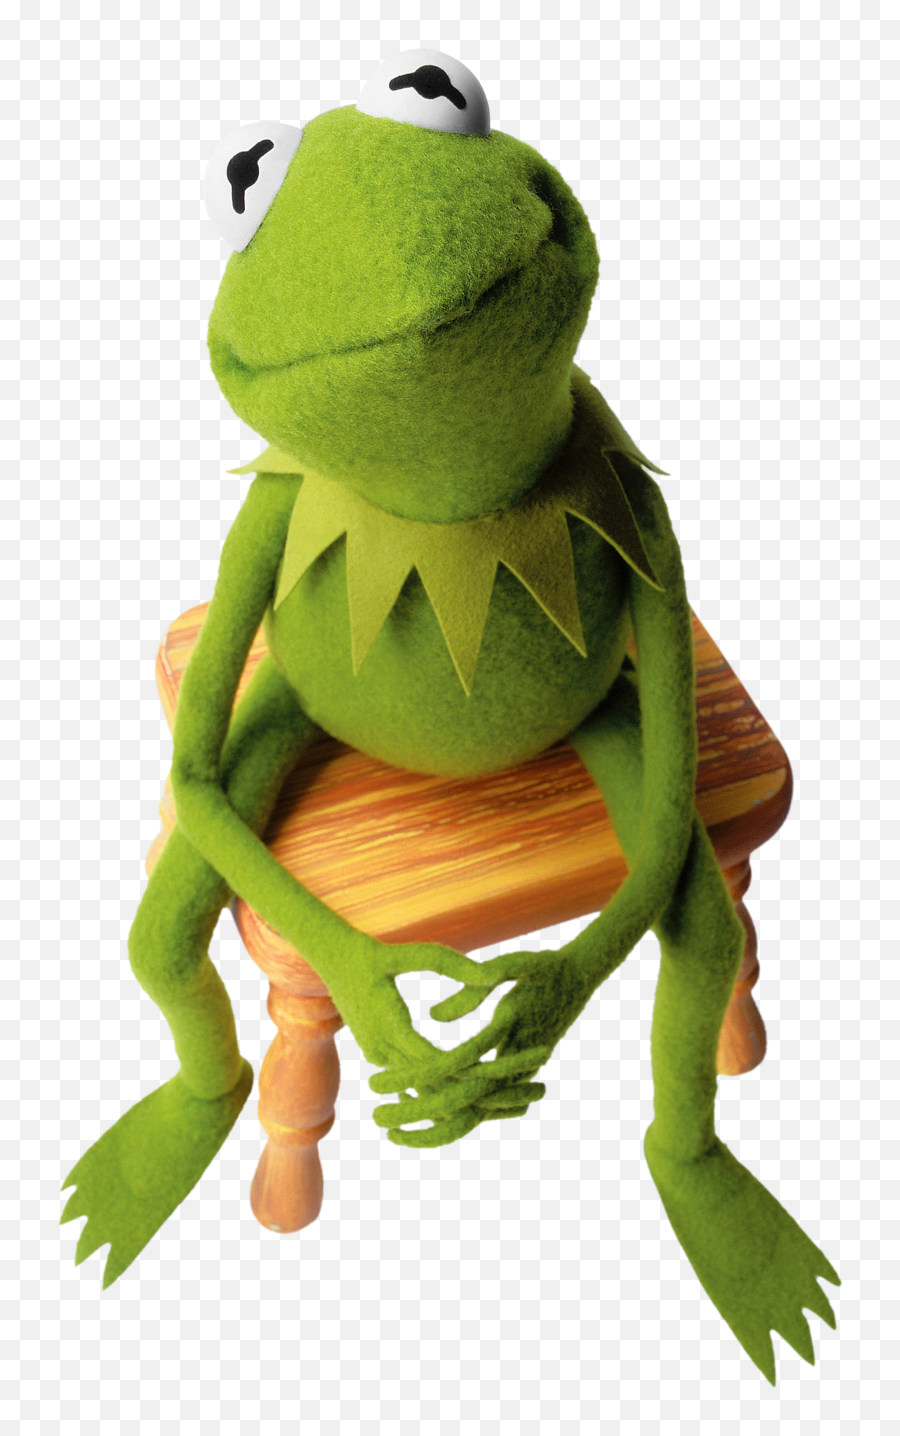 Kermit Png Picture - Kermit The Frog,Kermit The Frog Png